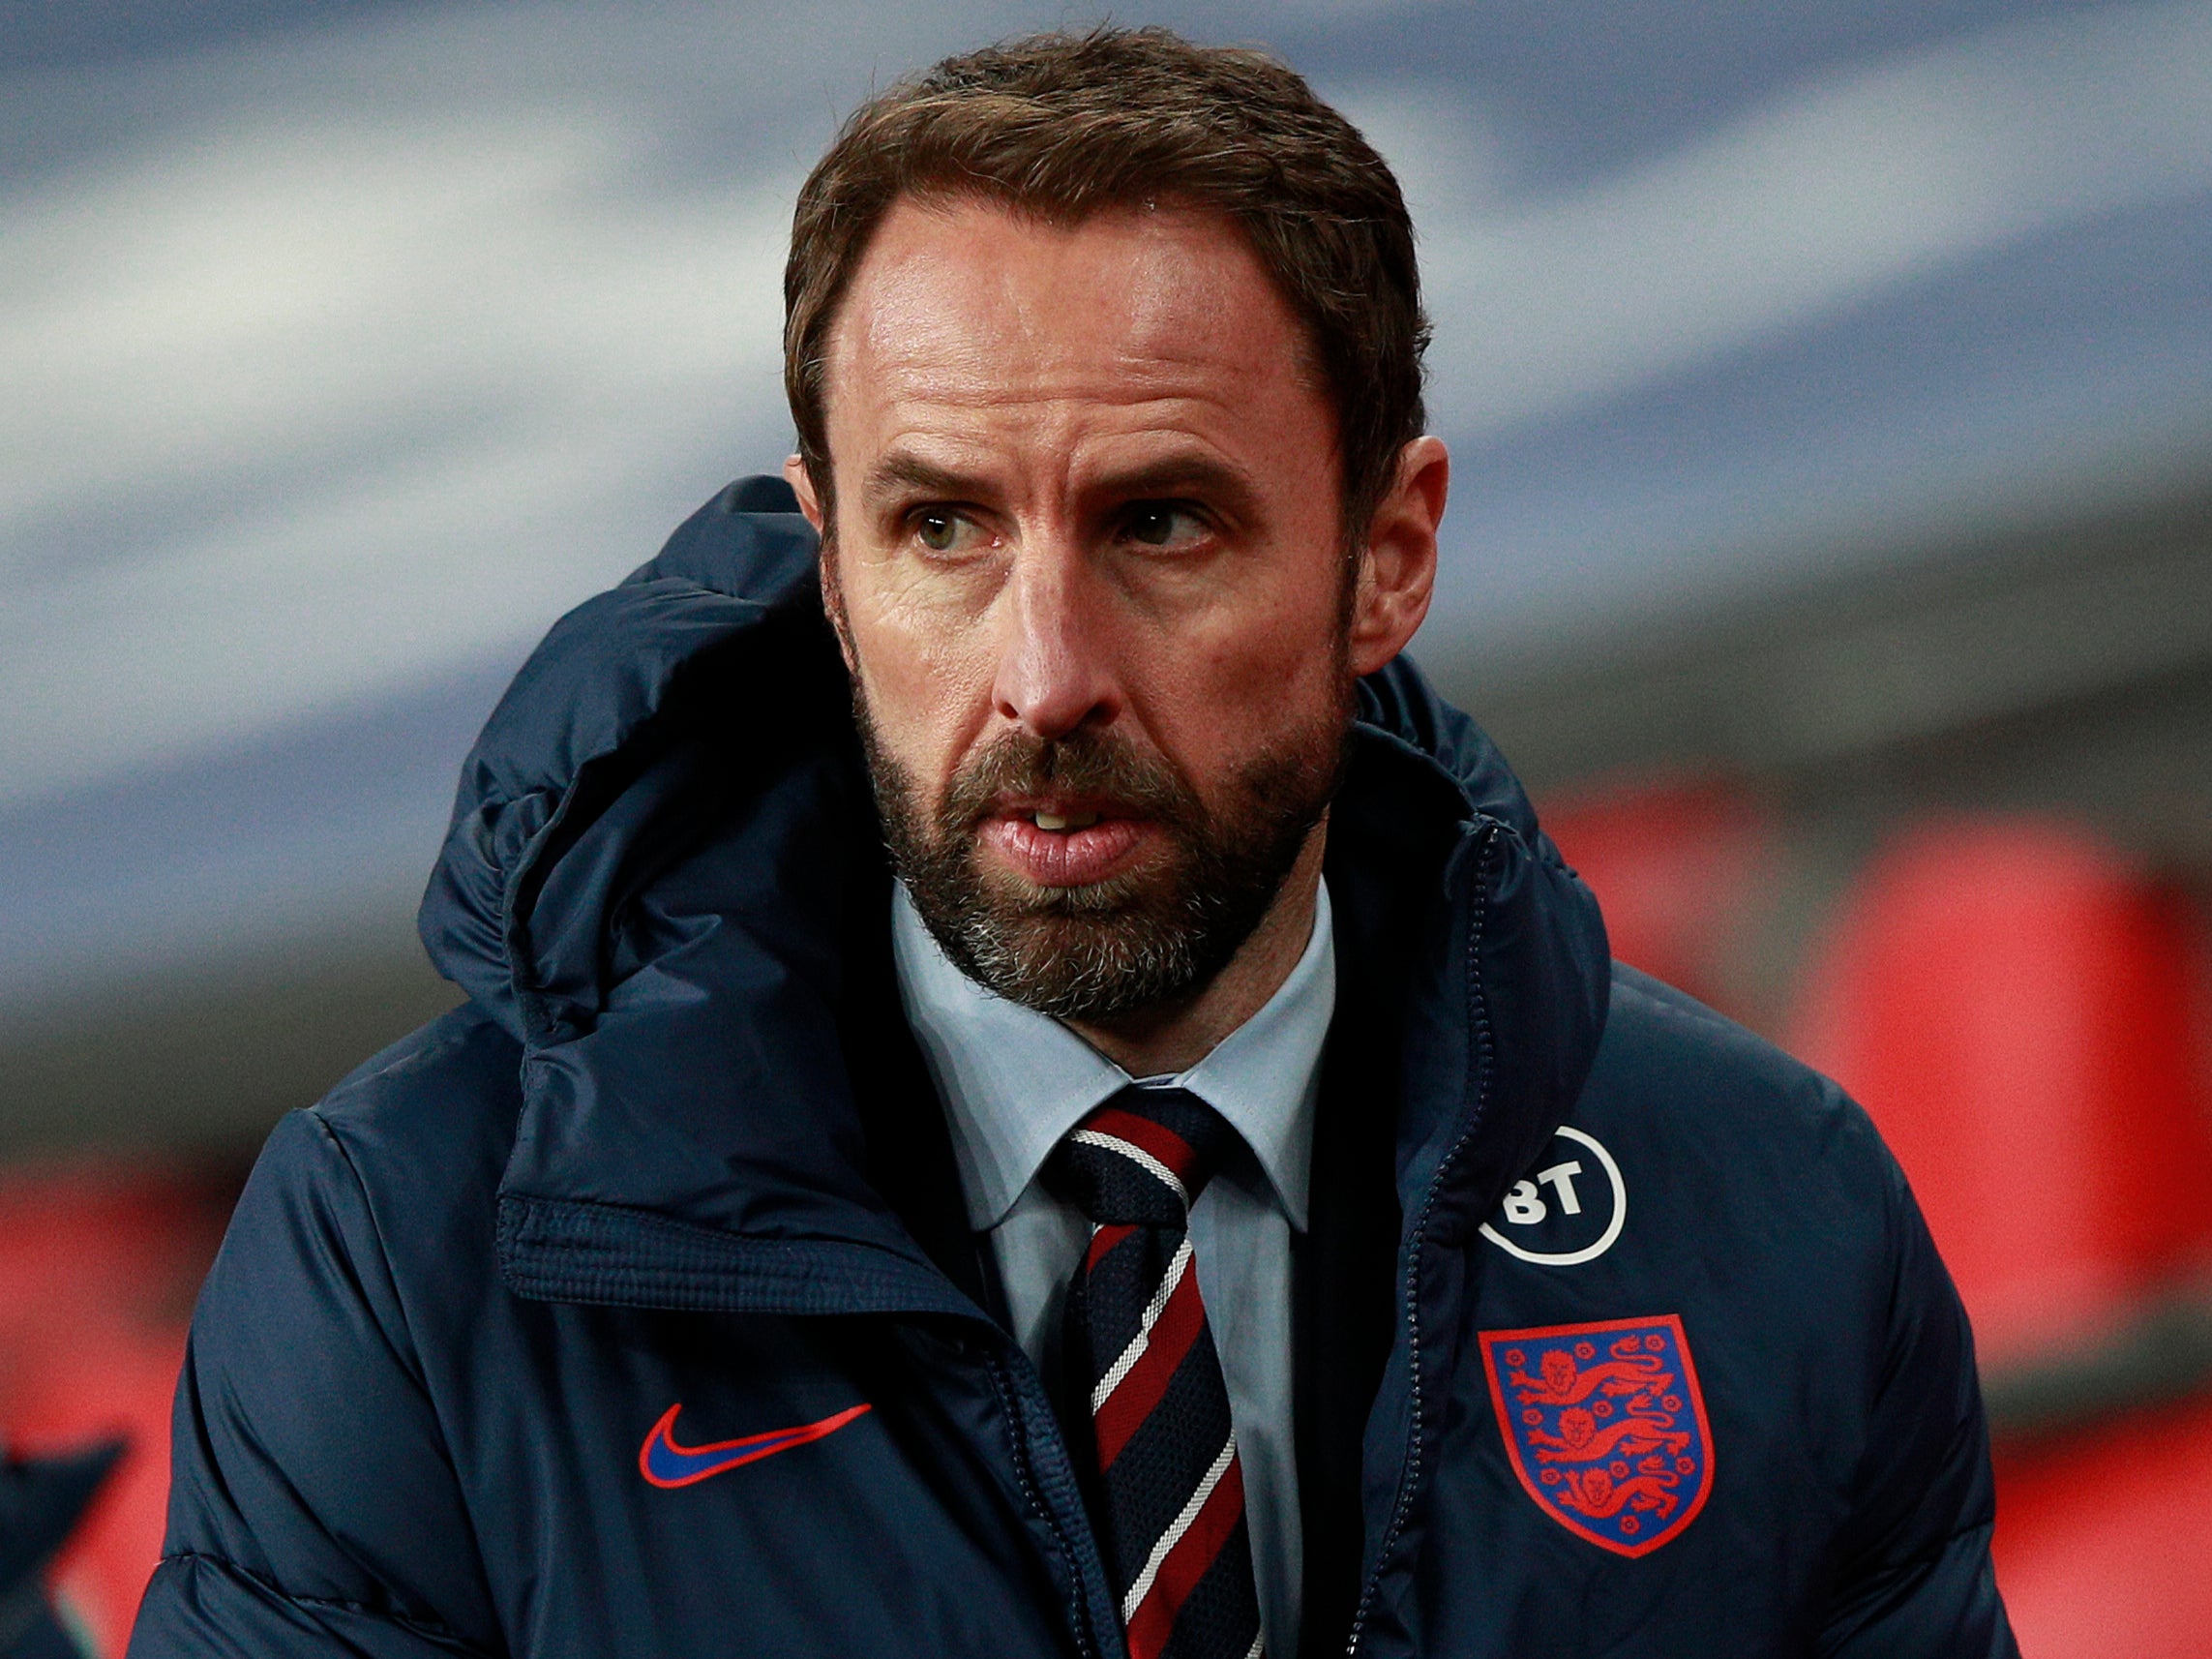 Manager Gareth Southgate wants his side to be ruthless against San Marino